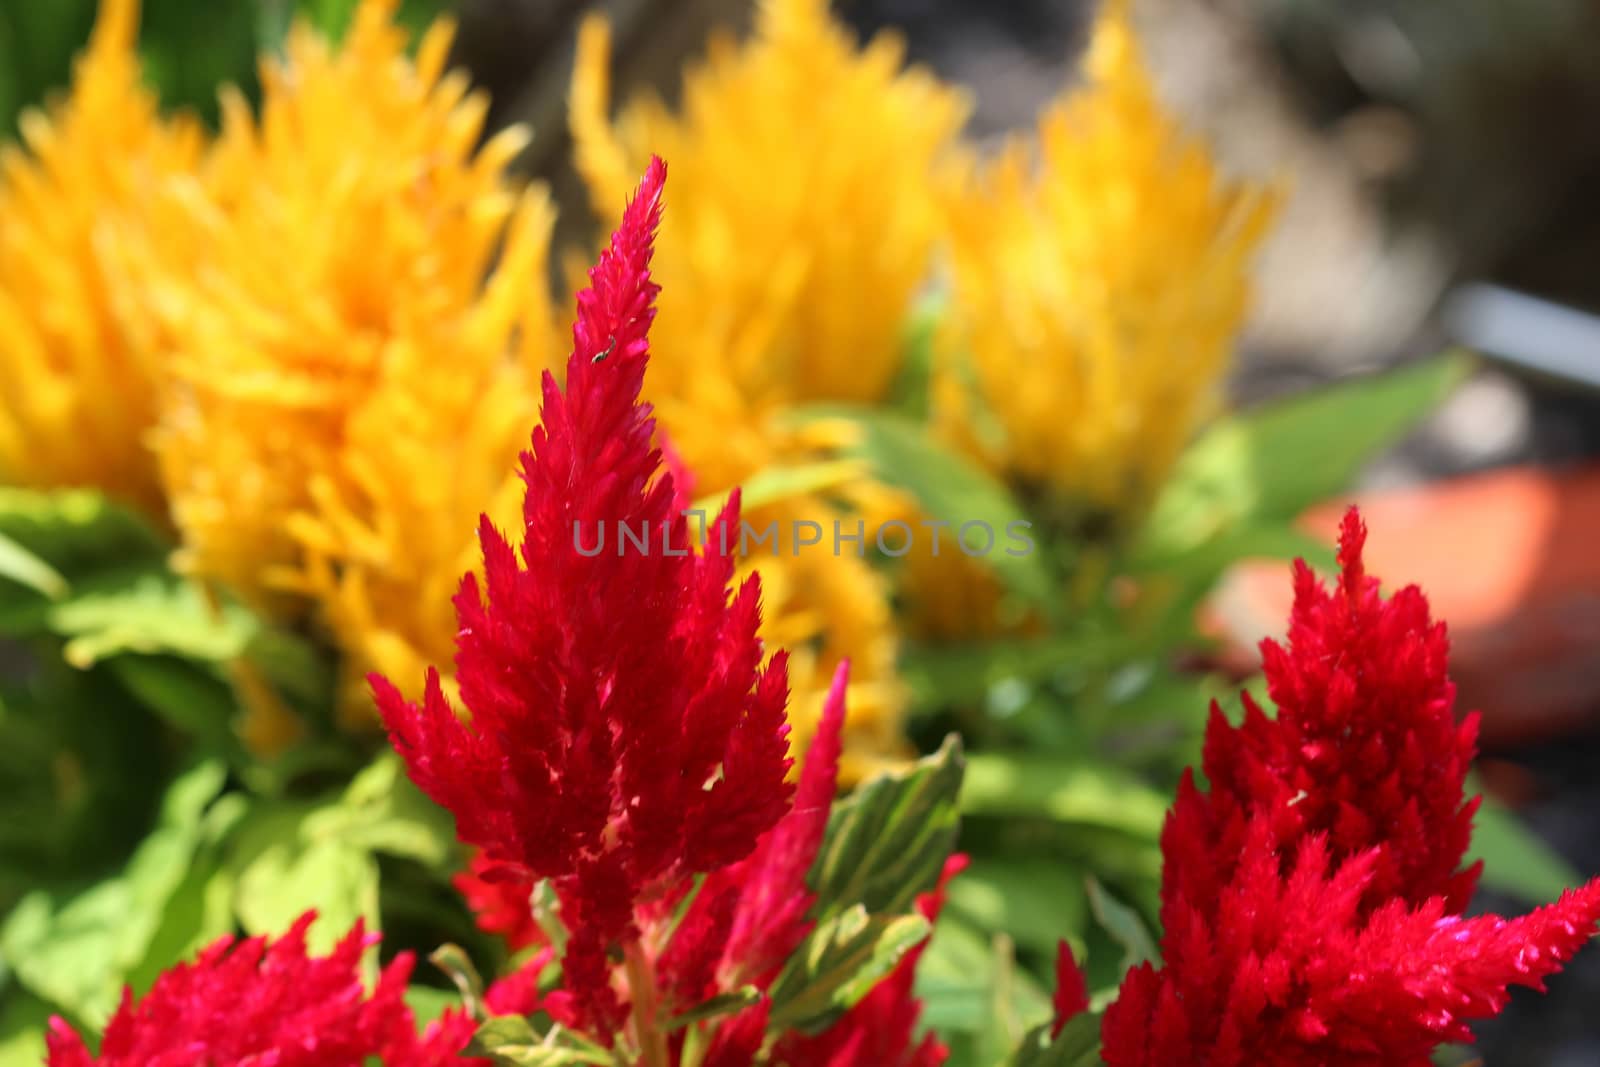 Red and Yellow Celosia Flowers by Catmando